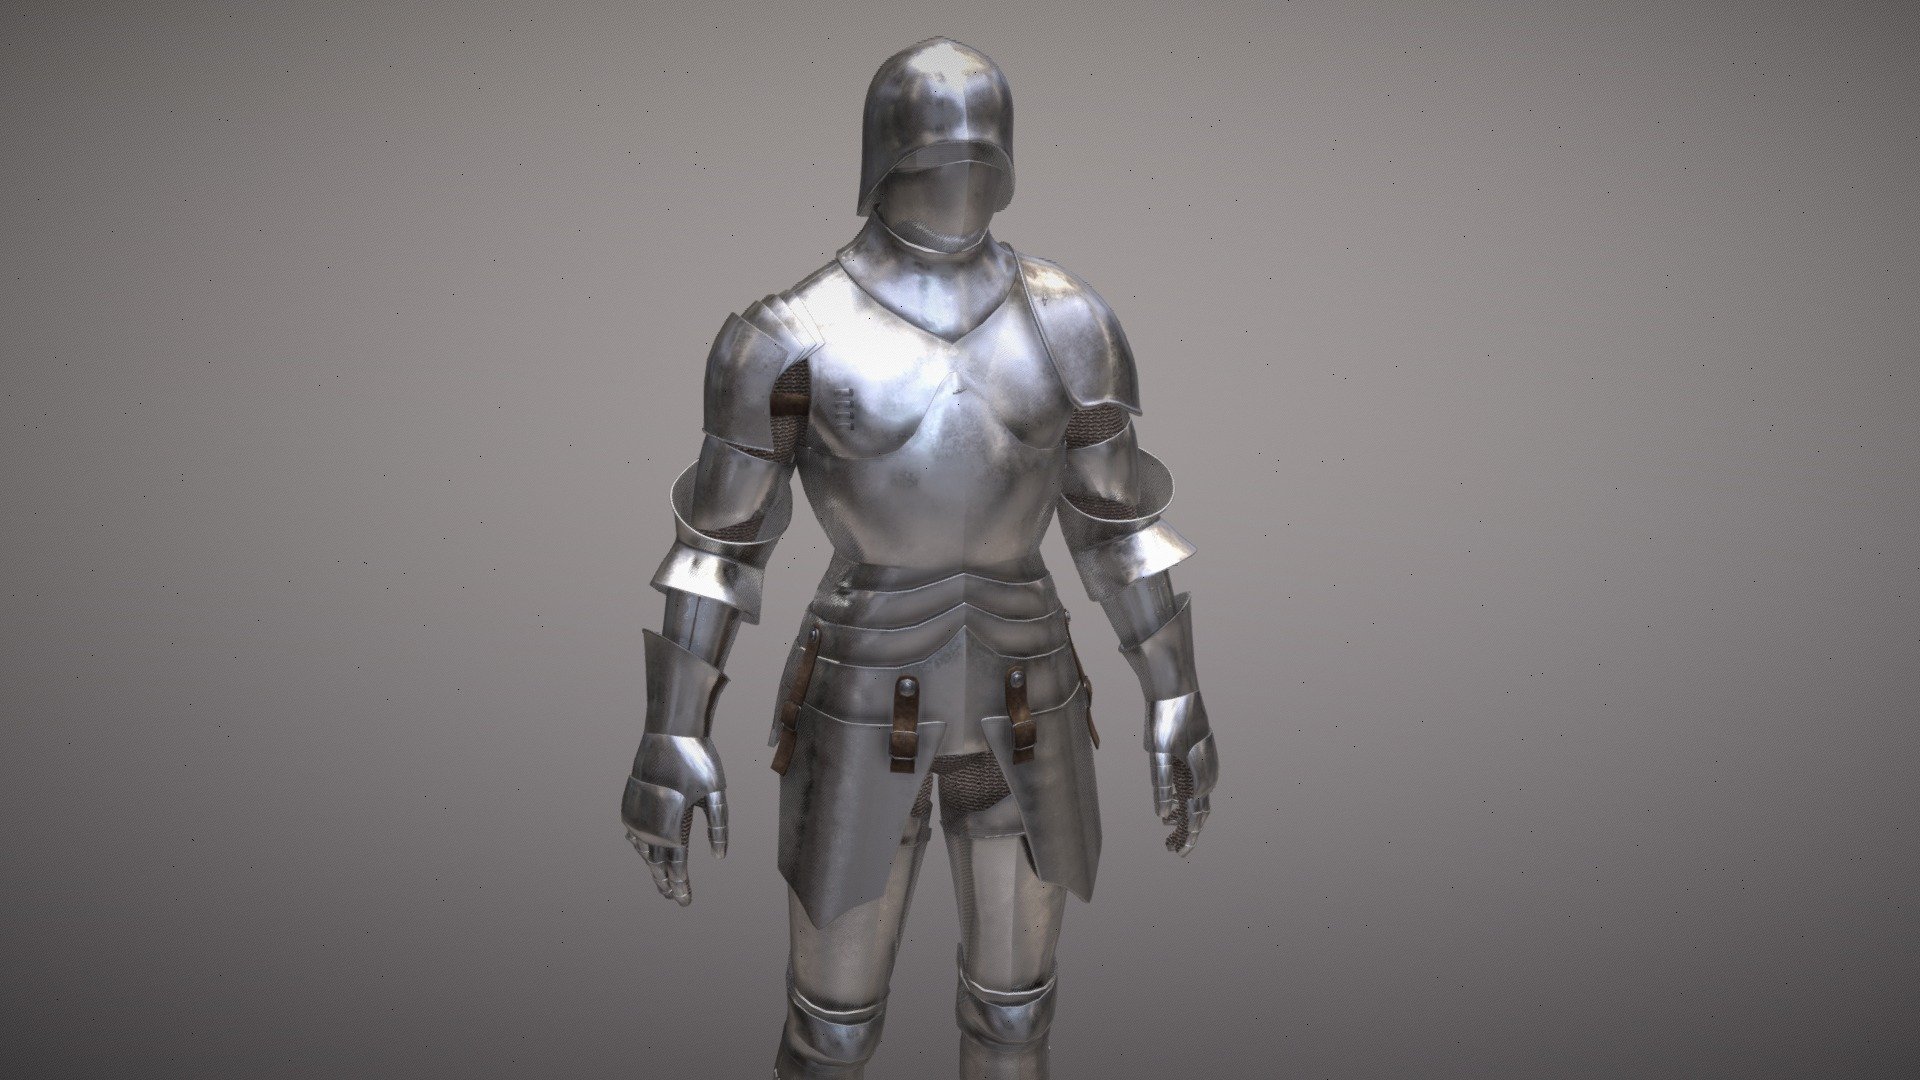 This 3D model showcases the intricate details of the armor worn by knights during the medieval era. The model features all components of the handmade armor, including the helmet, body armor, gauntlets, and belts. Each piece of the model has been crafted from realistic materials, and the armor design stays true to the aesthetic of medieval armor.

It's worth noting that while the armor is inspired by medieval armor, it is not a historically accurate representation of any specific period or region. Instead, the design elements are a combination of different styles and periods. This makes it an excellent resource for historical or fantasy projects that require a flexible approach to armor design.

This model is a great point of interest for history buffs, artists, and anyone interested in medieval history. It can also serve as a valuable resource for historical or fantasy films, games, and other artistic works. Presented as a 3D model, every detail of the armor can be clearly seen and examined 3d model